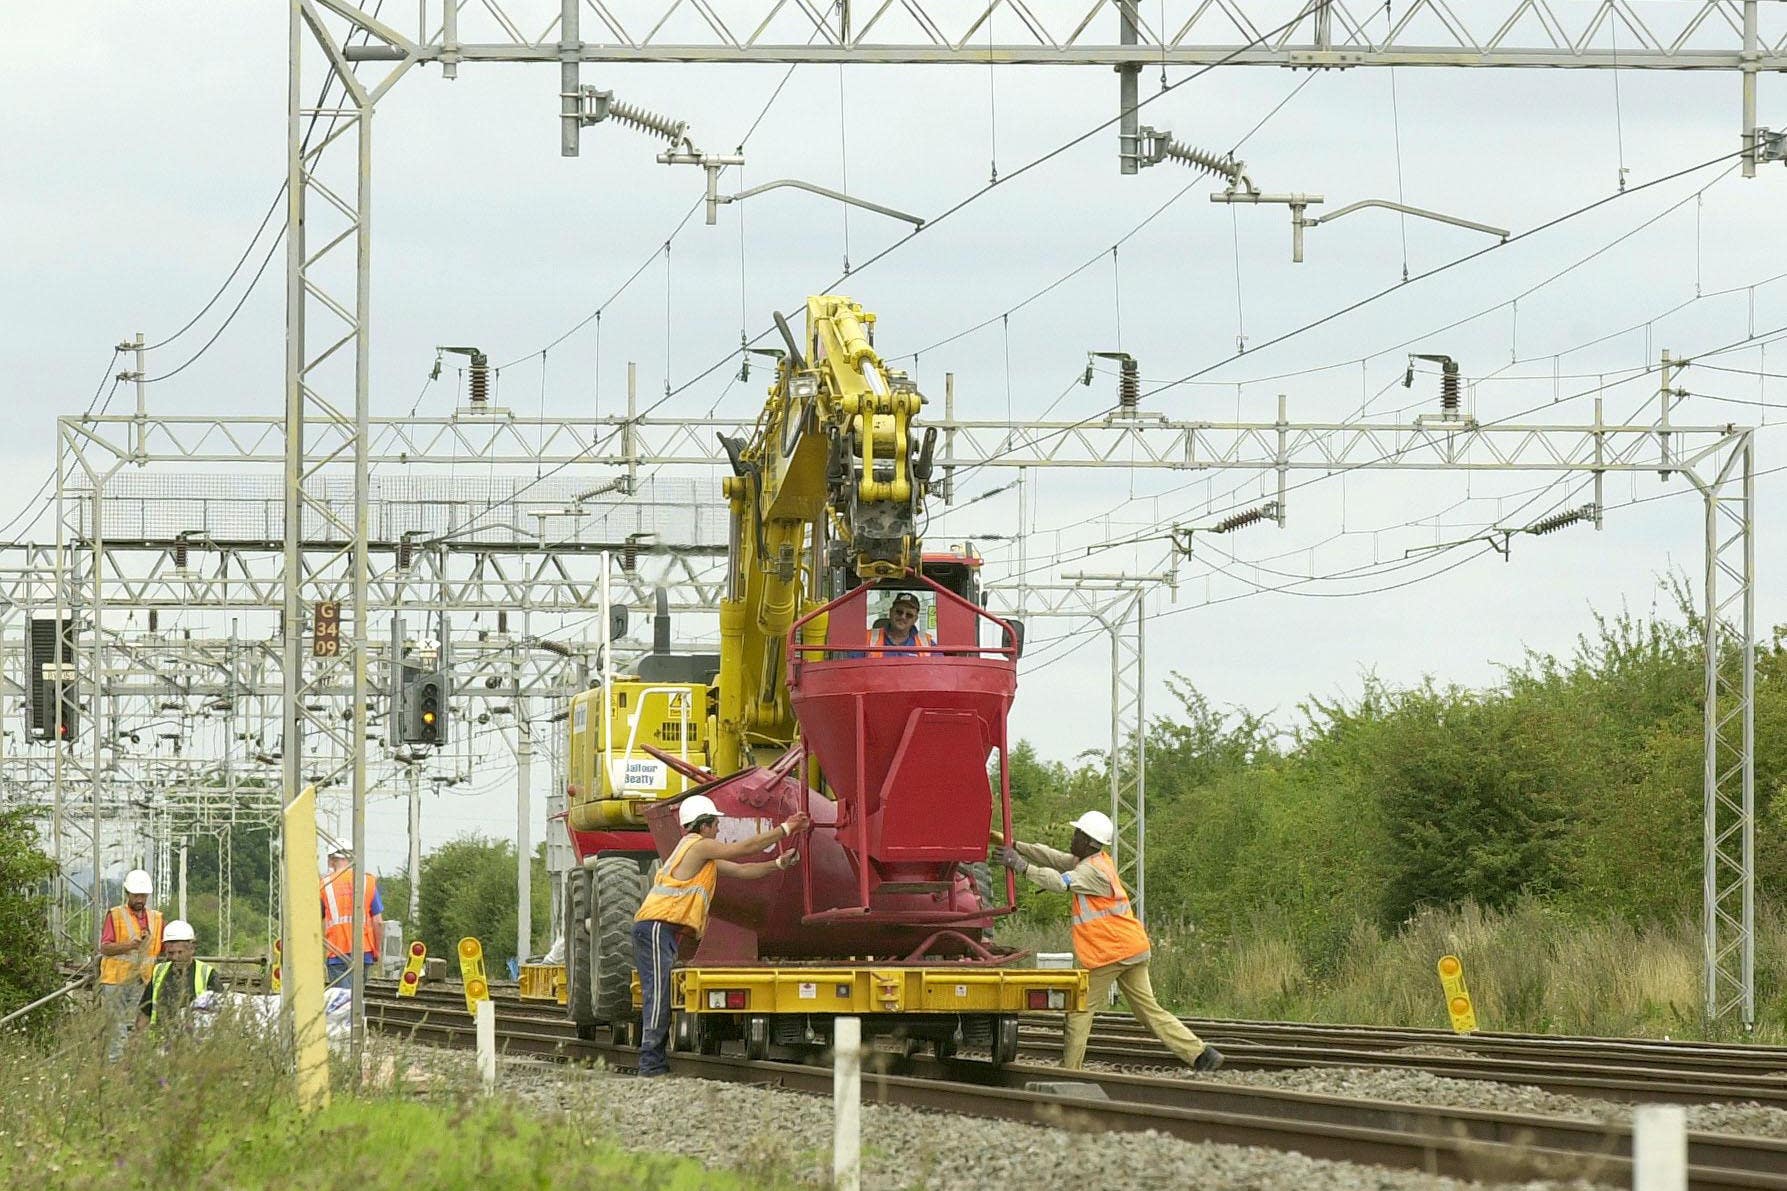 Engineers are working to repair part of the West Coast Mainline after flooding (credit: Matthew Fearn/PA)